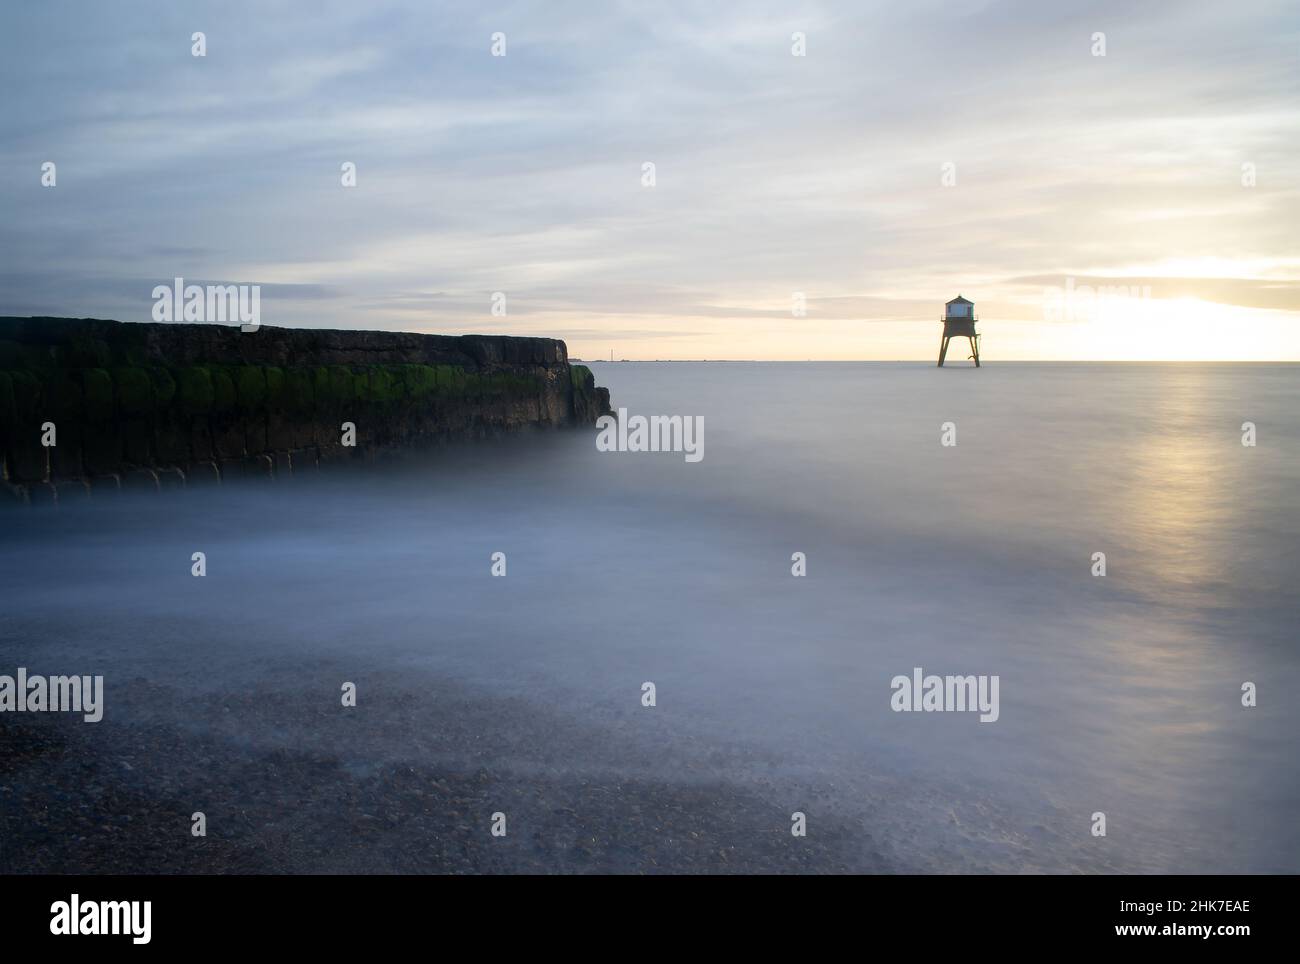 Waves break across the shingle beach and mossy breakwater during sunrise at Dovercourt Lighthouse Harwich & Dovercourt, North Essex, England. Stock Photo